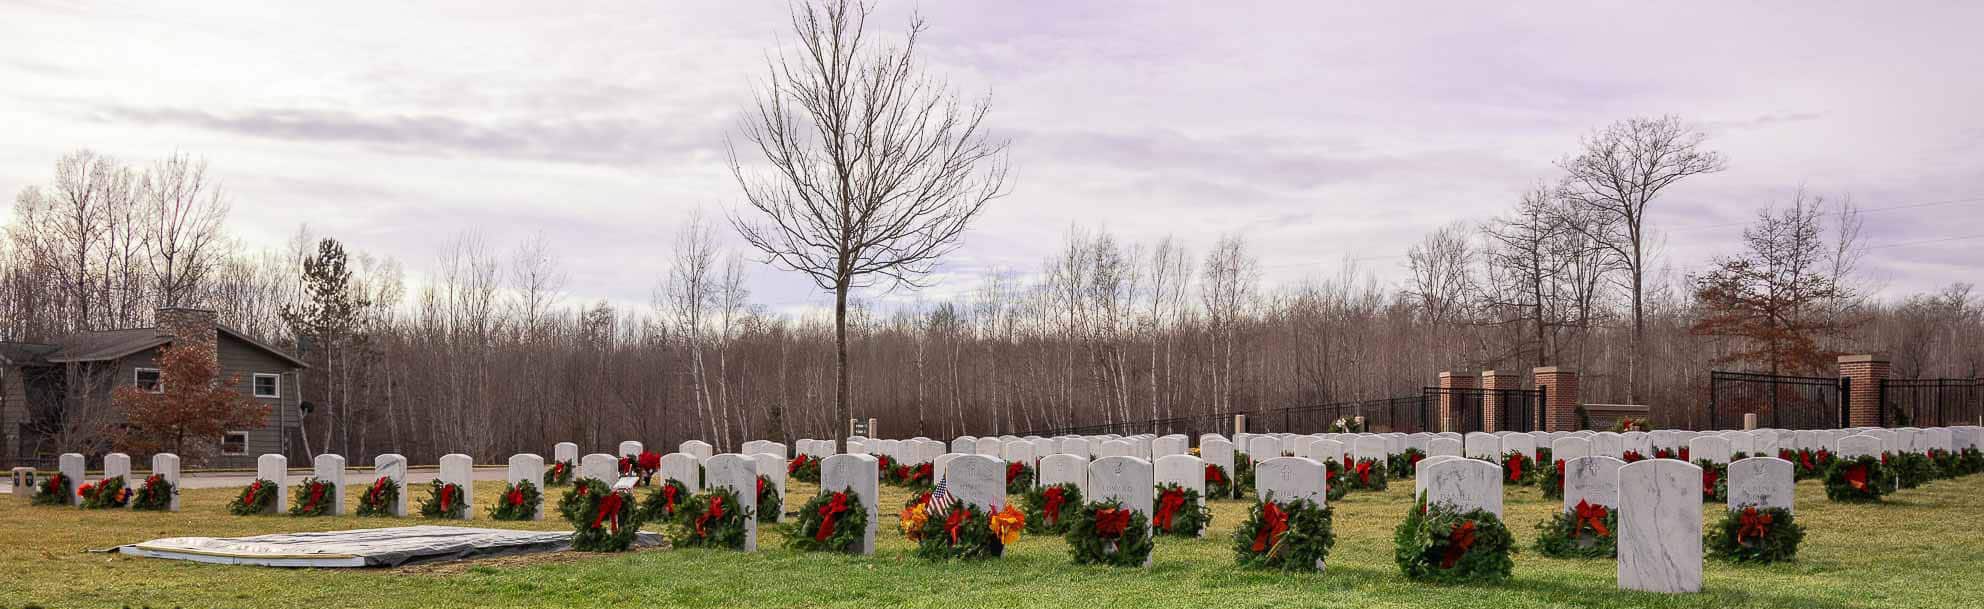 ‘Wreaths Across America’ ceremony held at Northwoods National Cemetery in Harshaw